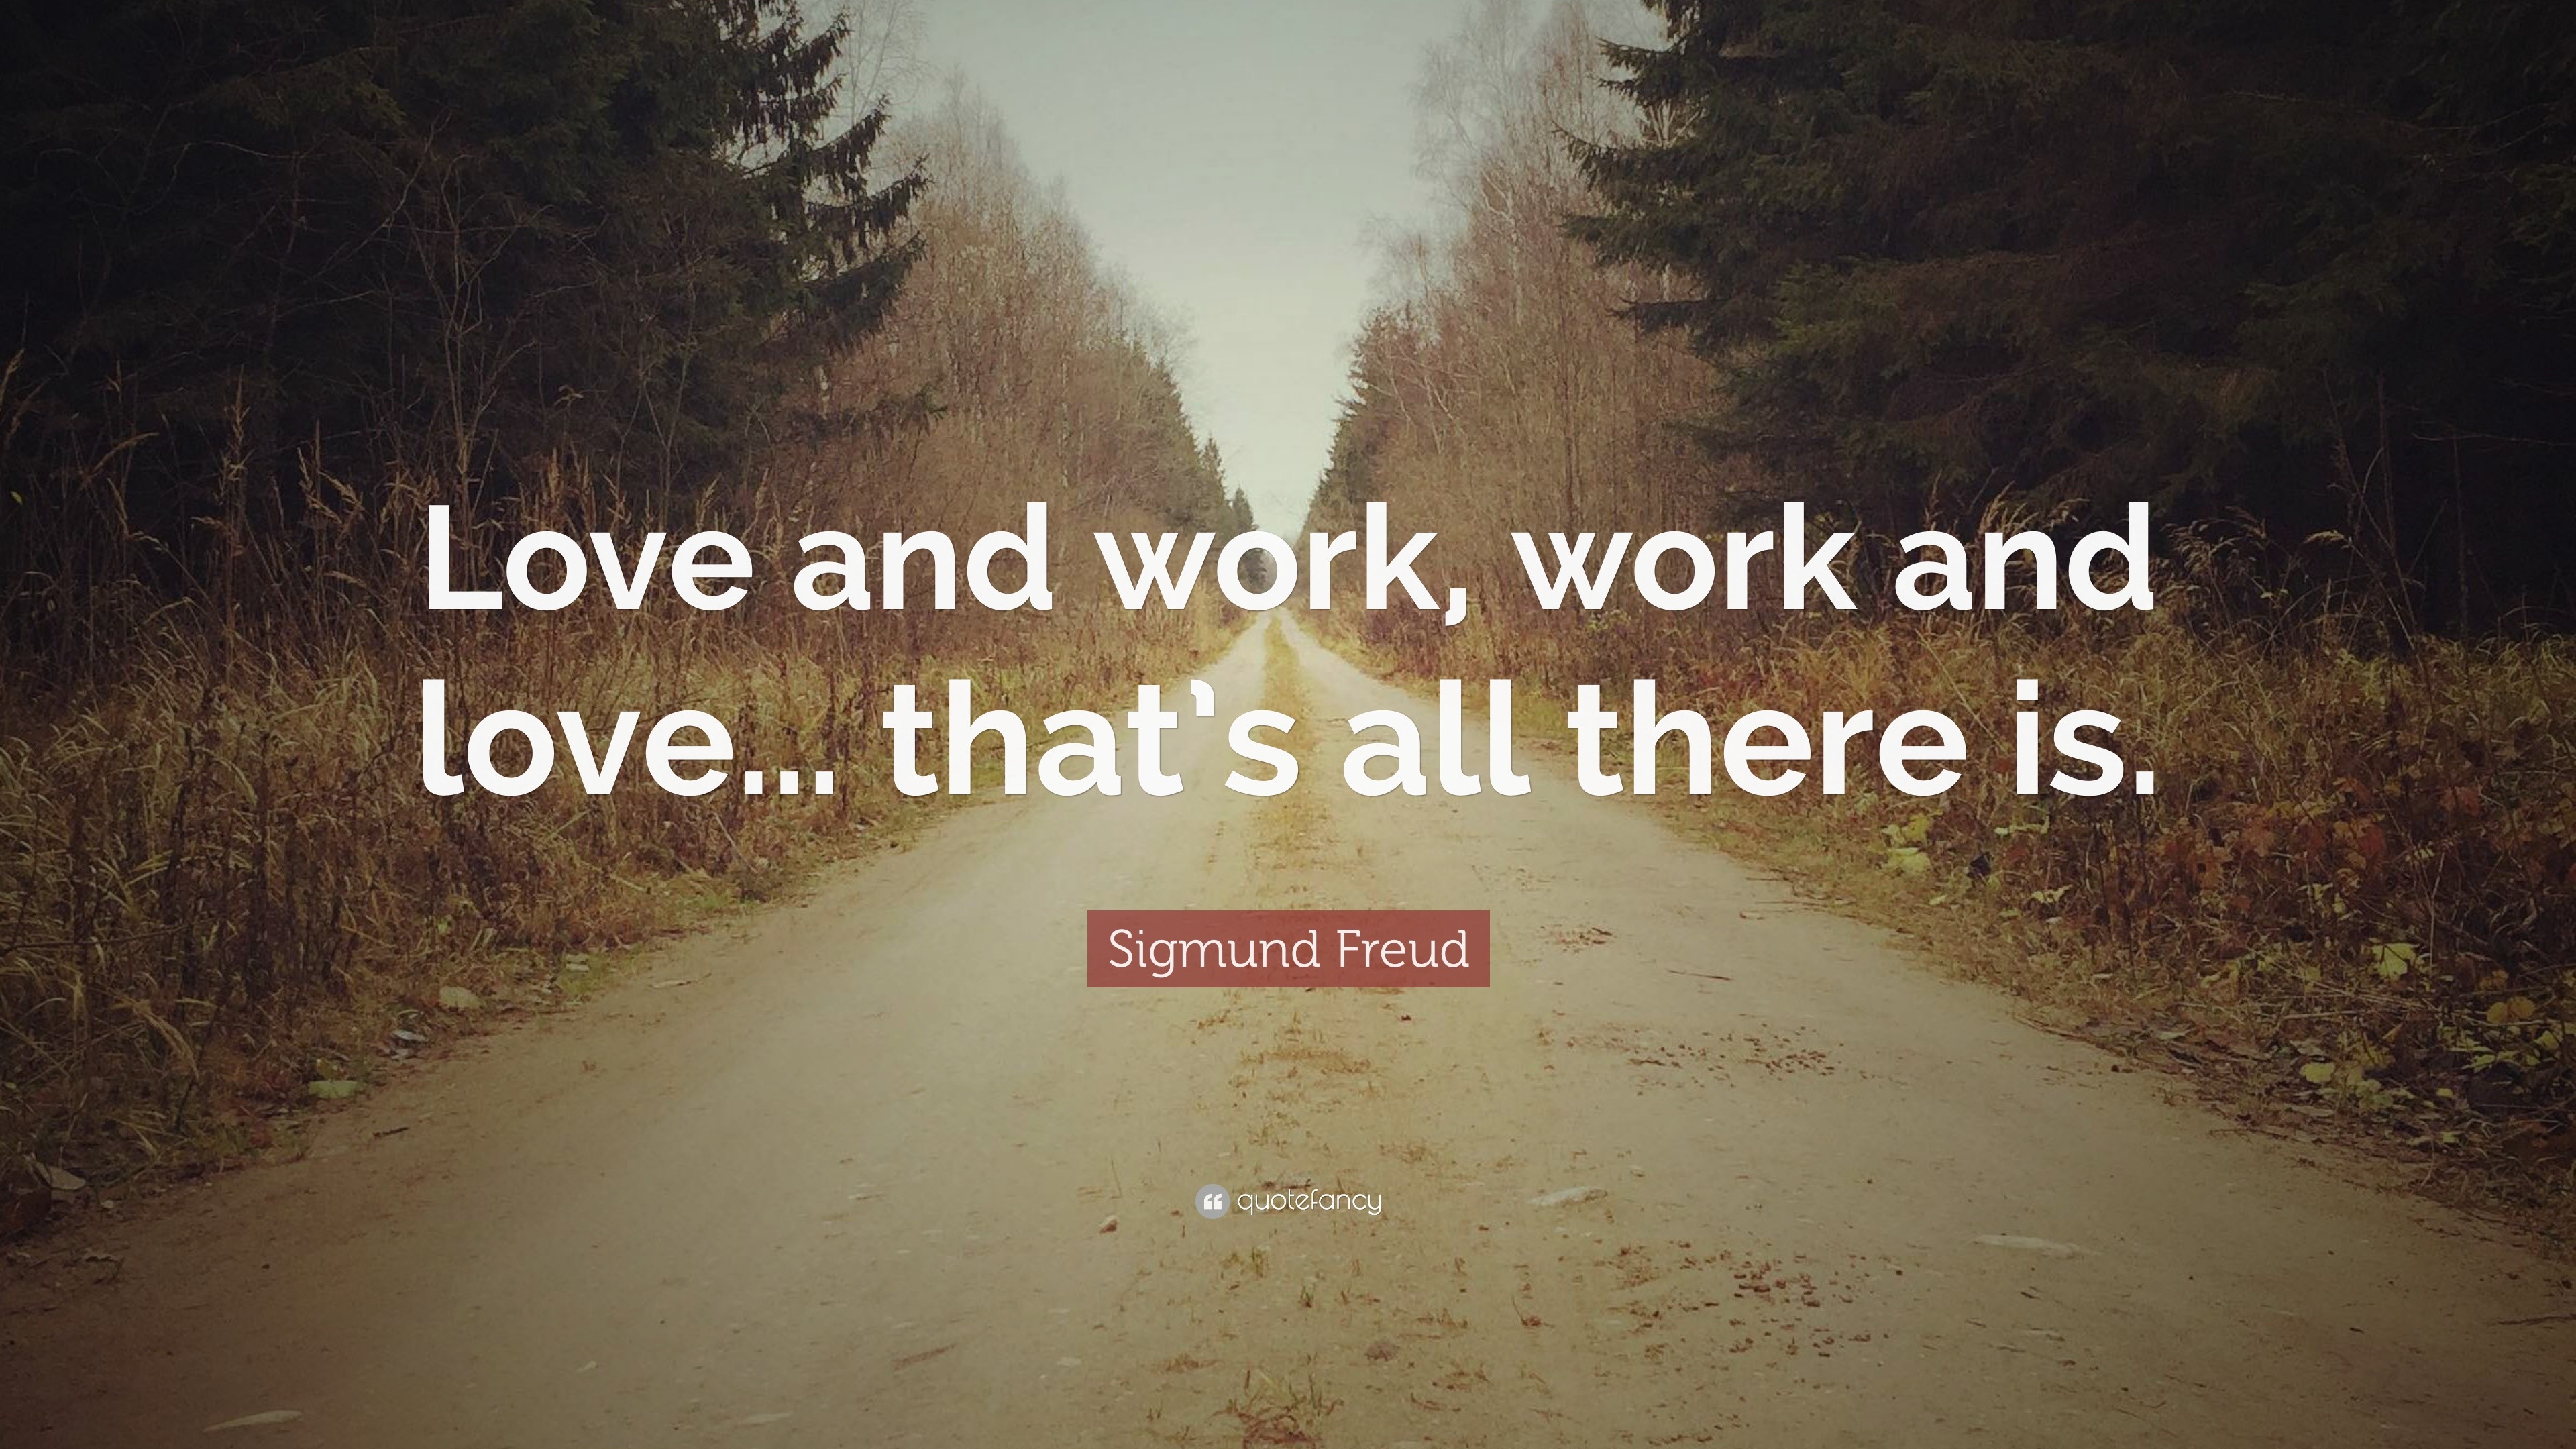 Sigmund Freud Quote: “Love and work, work and love... that’s all there is.”